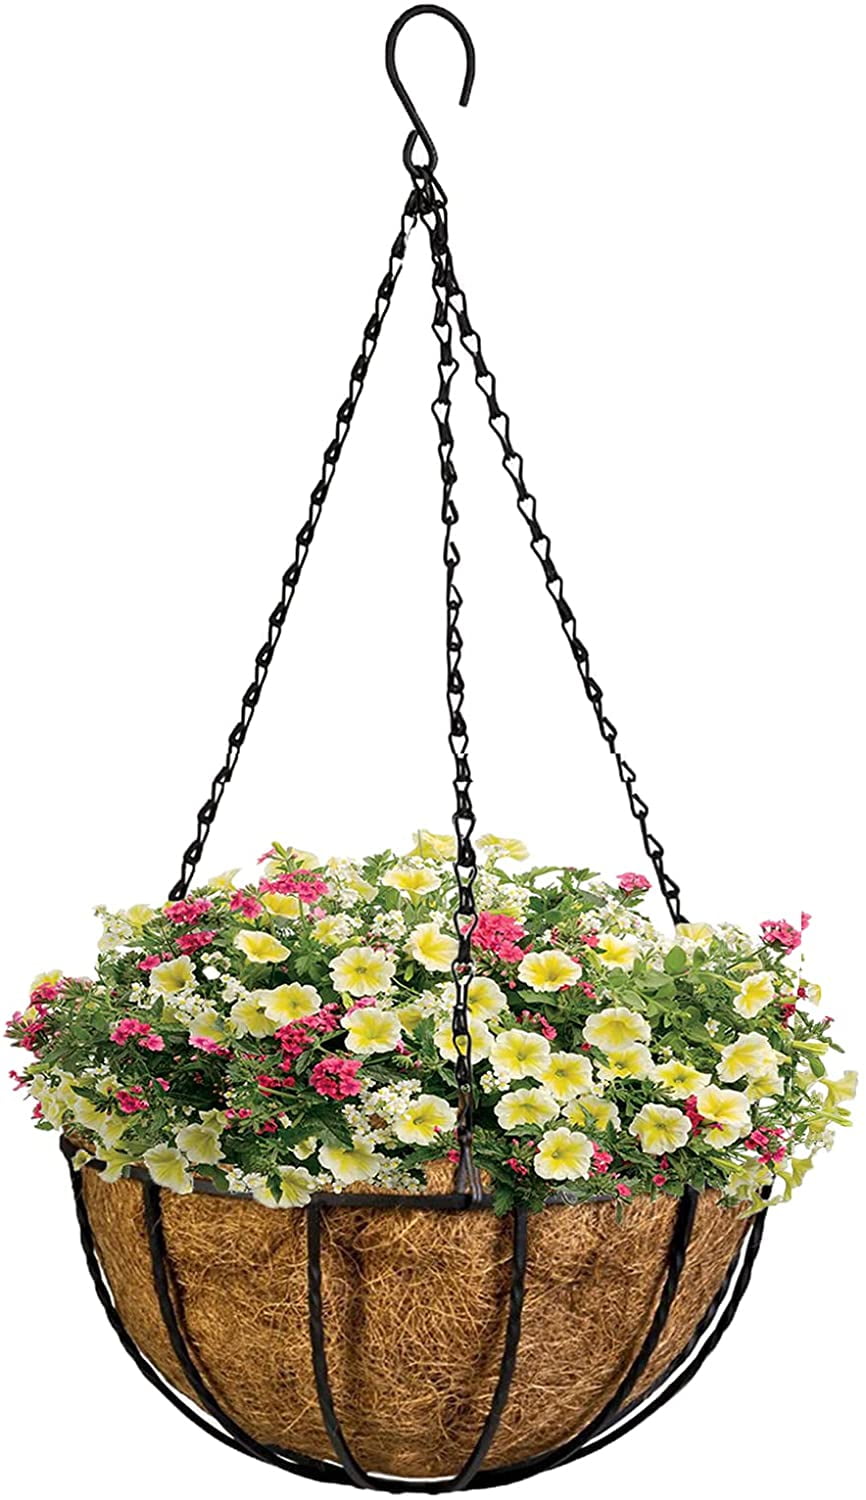 20 x 12" Wire Hanging Basket 30cm Round Bottom Baskets Metal Coated Green Plant 